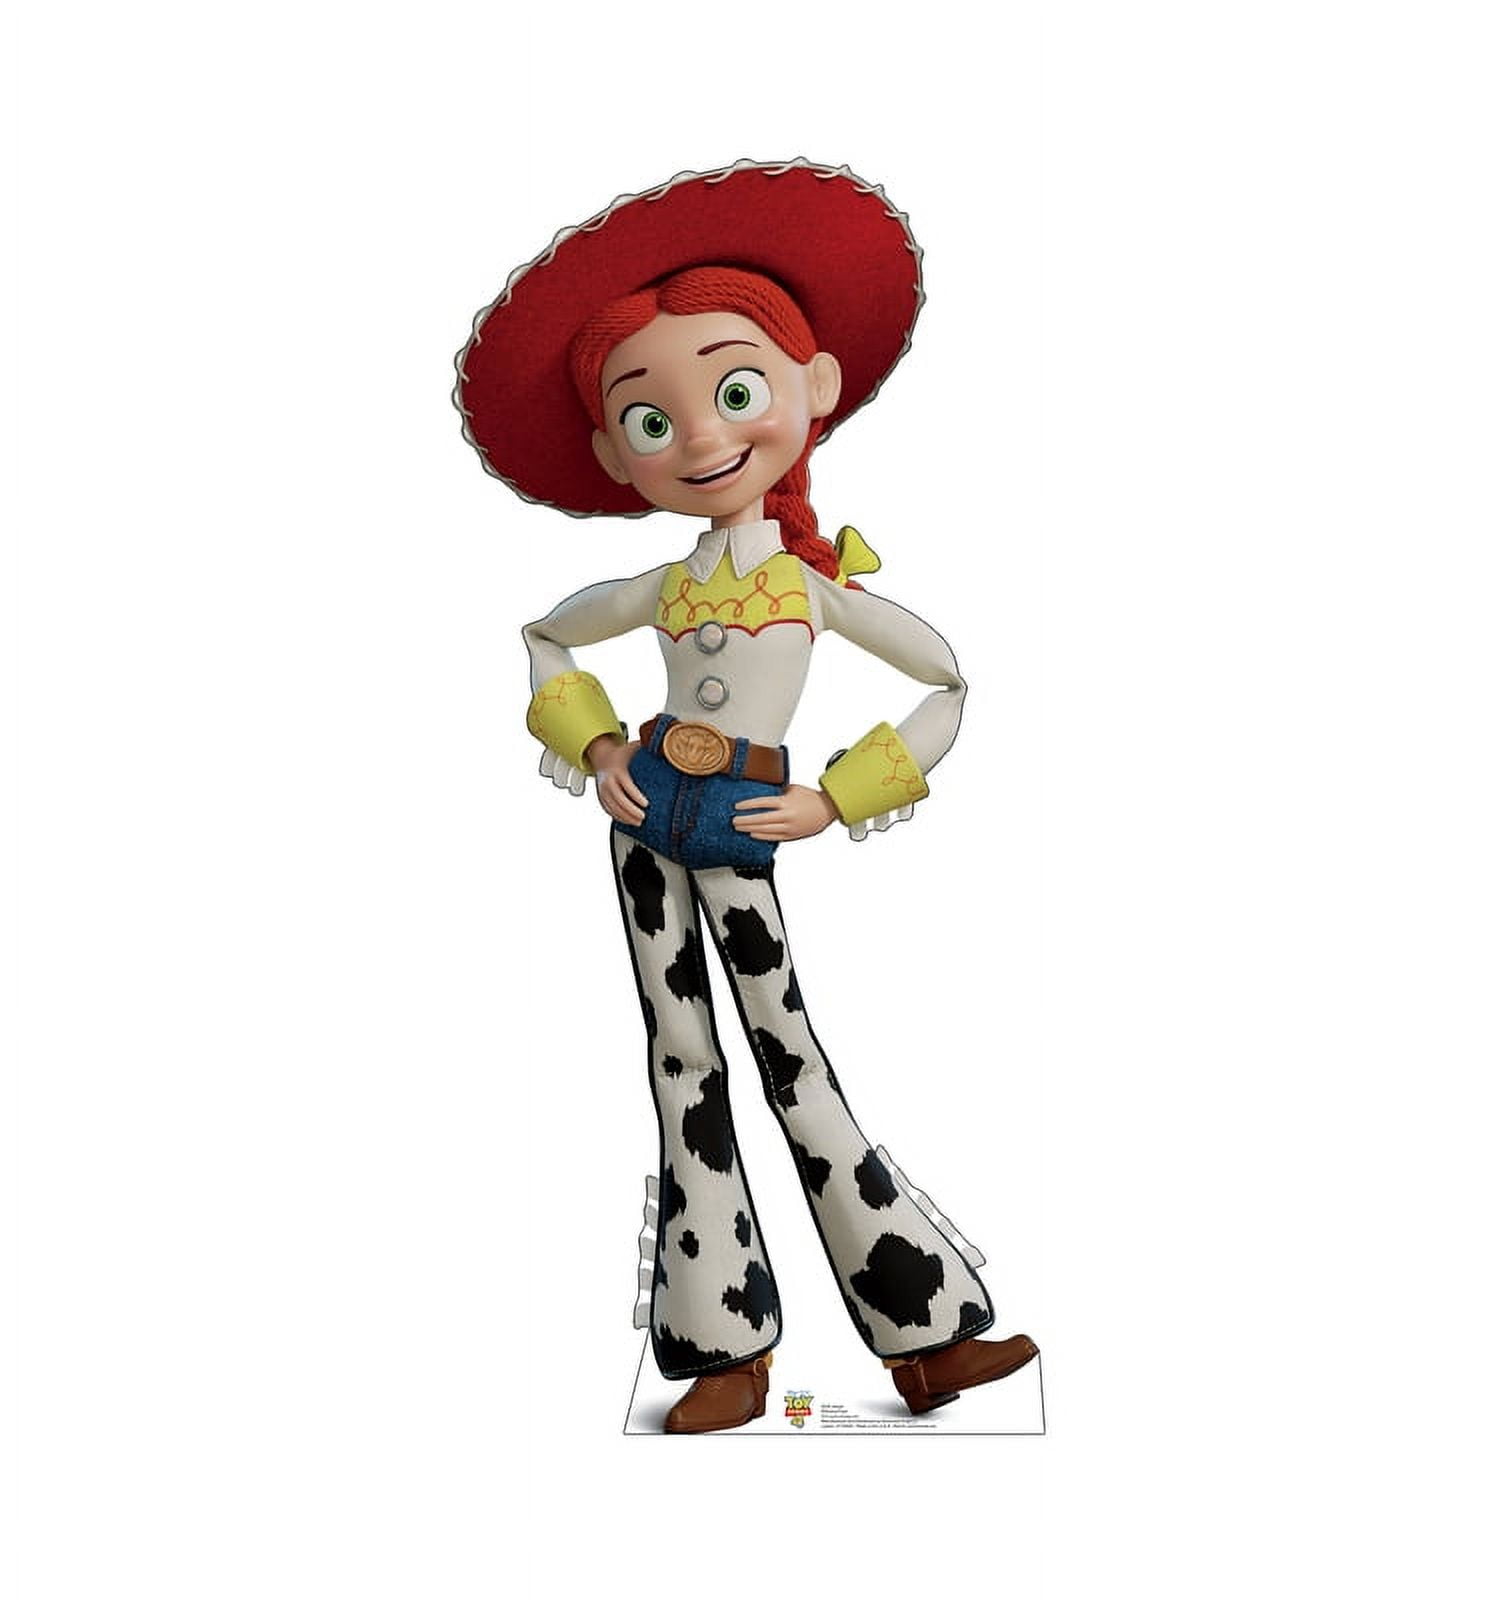 Picture of Advanced Graphics 2936 53 x 24 in. Jessie Disney & Pixar Toy Story 4 Cardboard Cutout Standup